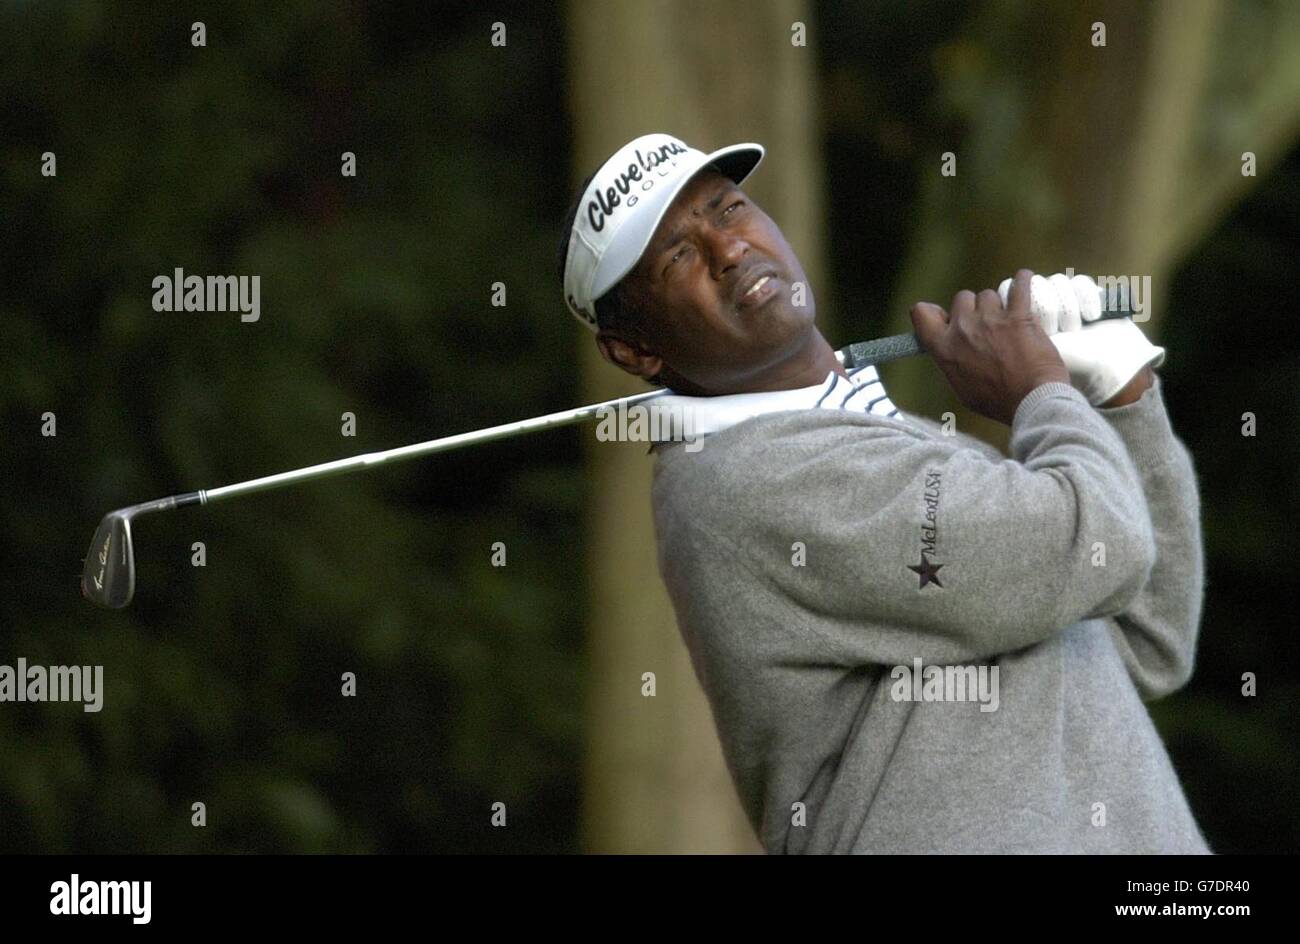 Fiji's Vijay Singh tees off the 2nd hole, during the HSBC World Match Play Championship at Wentworth. 15/12/04: Vijay Singh has been named European Tour golfer of the year for the first time. Singh did not win a tournament on European soil but topped the US money list with record earnings of more than USD10million and nine victories, including the USPGA championship. Stock Photo